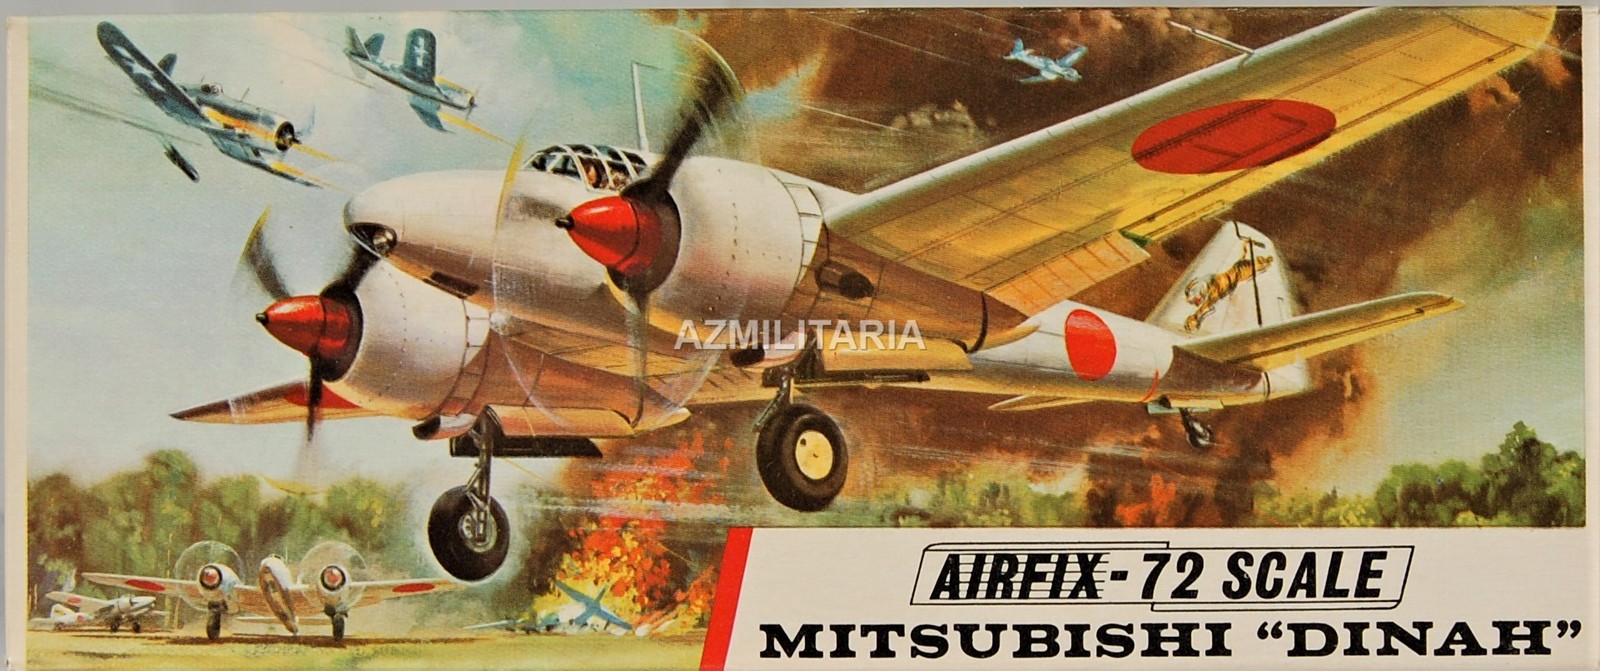 Primary image for Airfix-72 Mitsubishi "Dinah" 1/72 Scale Kit Pattern No. 295